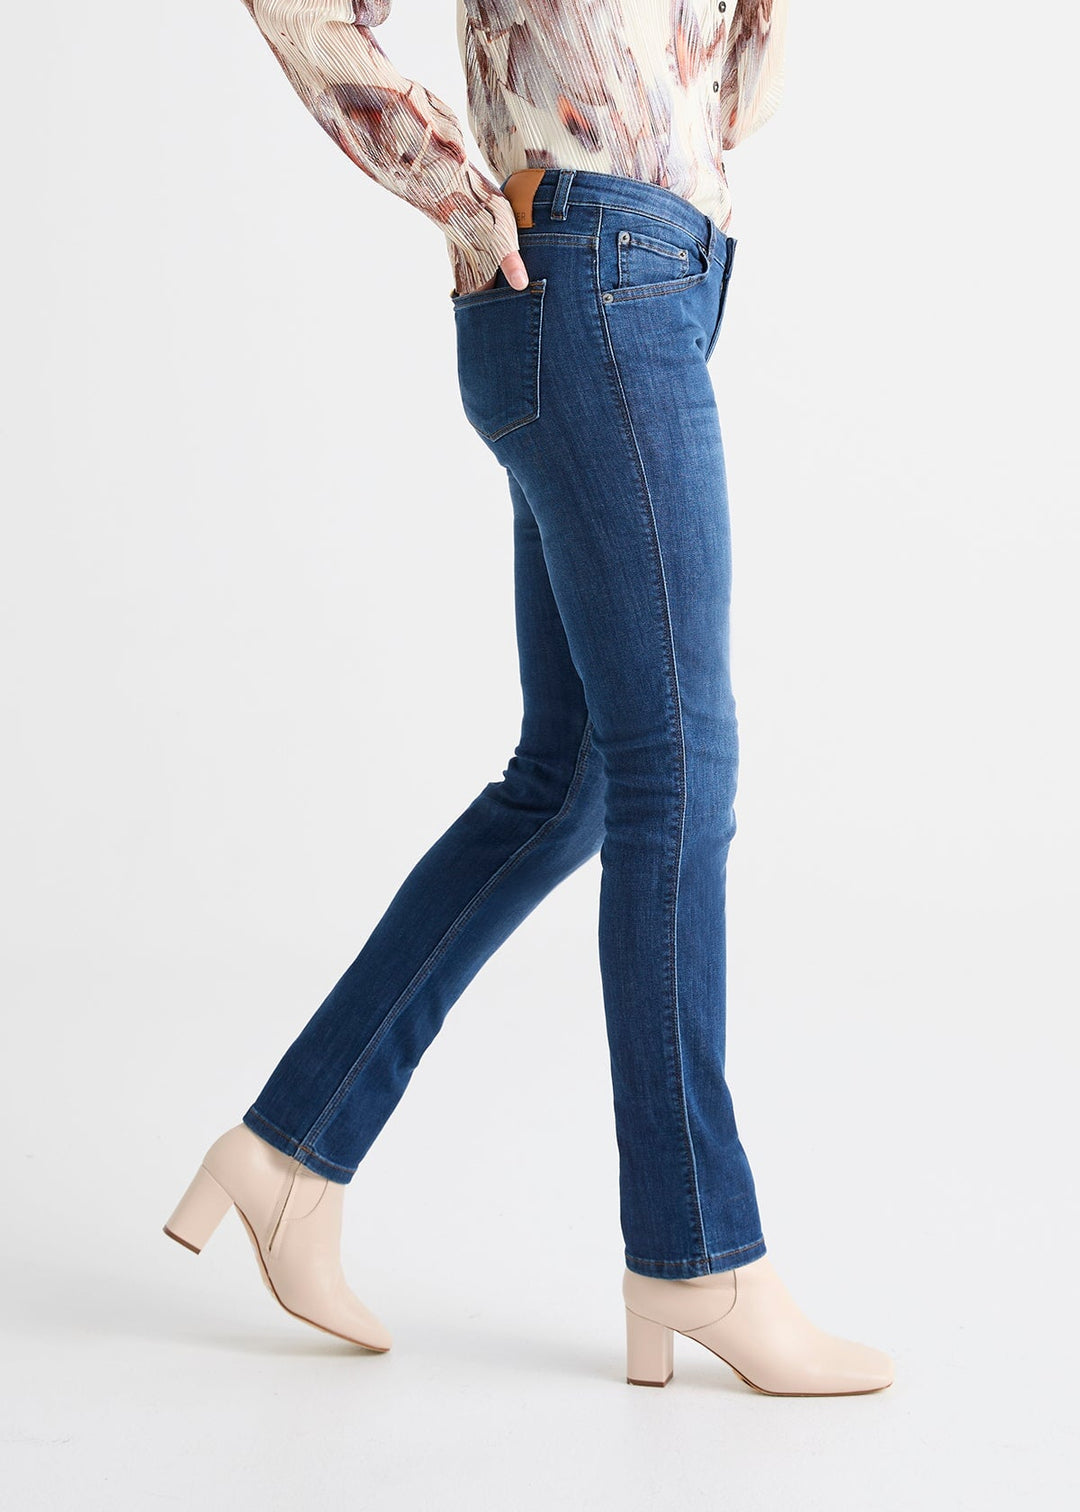 DU/ER - Performance Denim Slim Straight 30" - all things being eco chilliwack - women's clothing - sustainable fashion